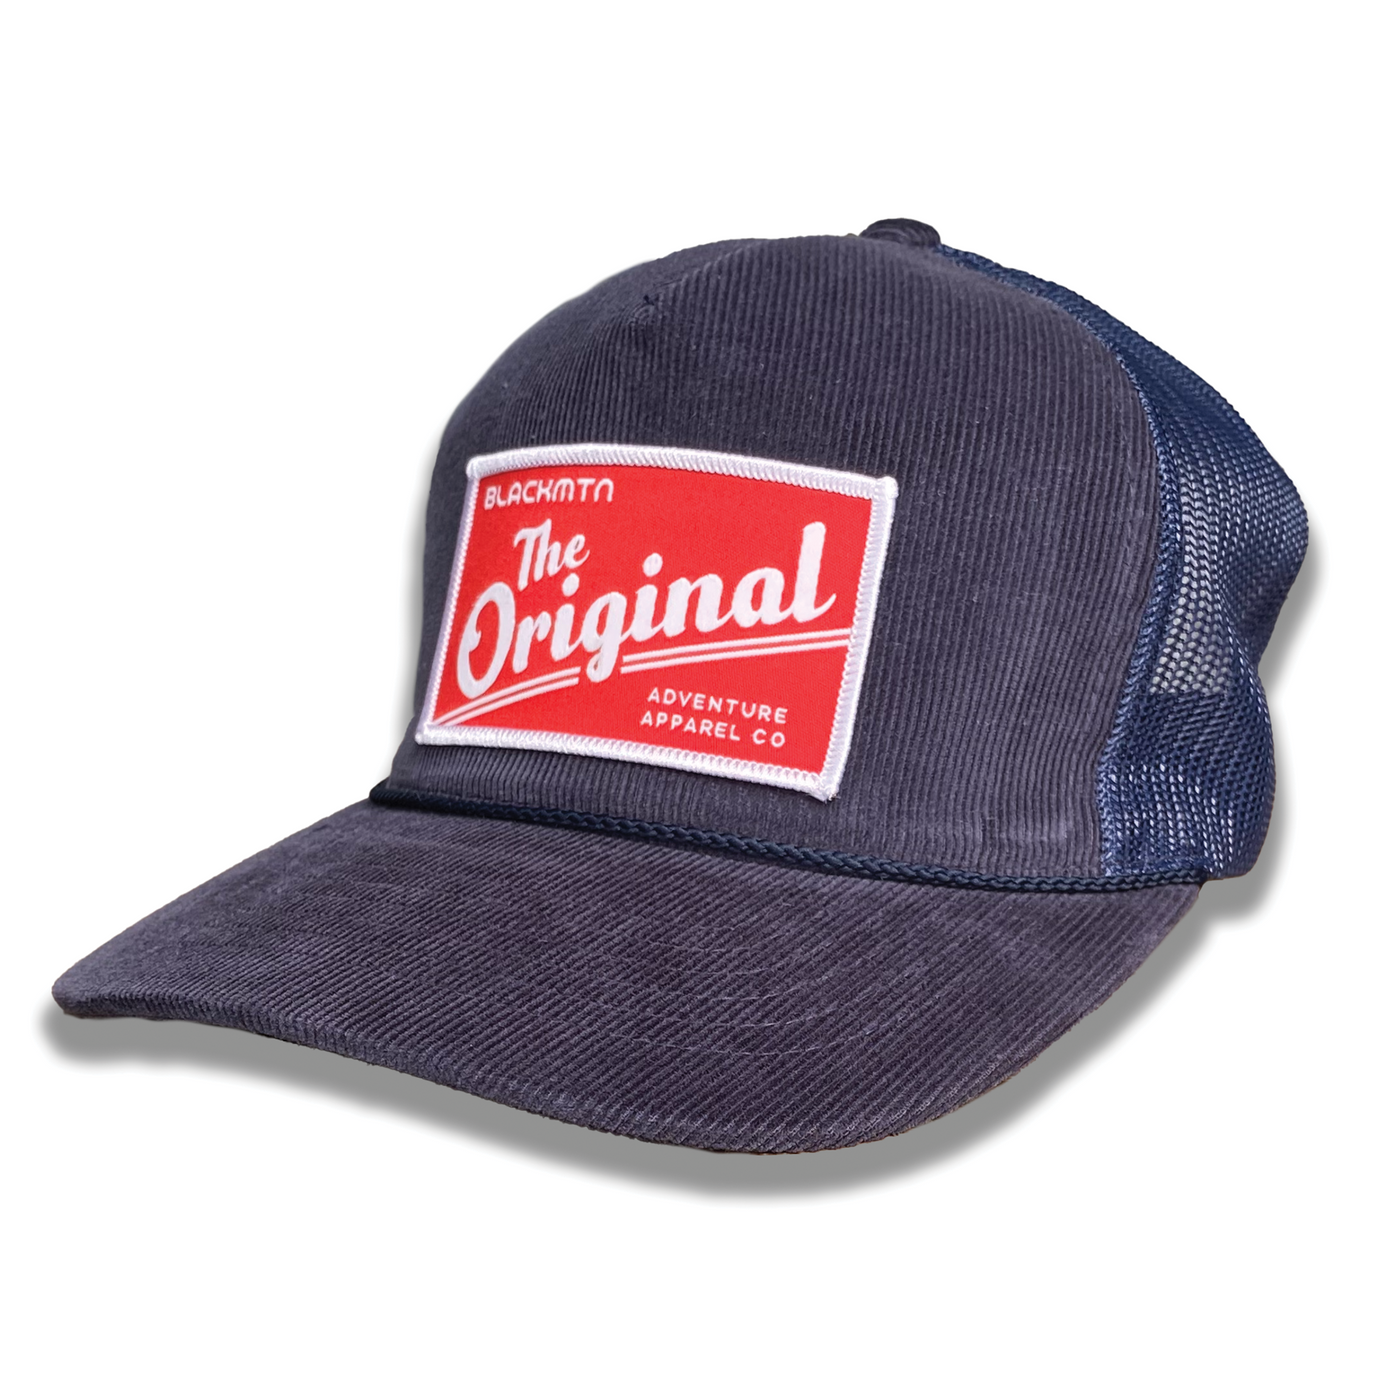 Navy Corduroy Trucker Hat with Original Red Patch